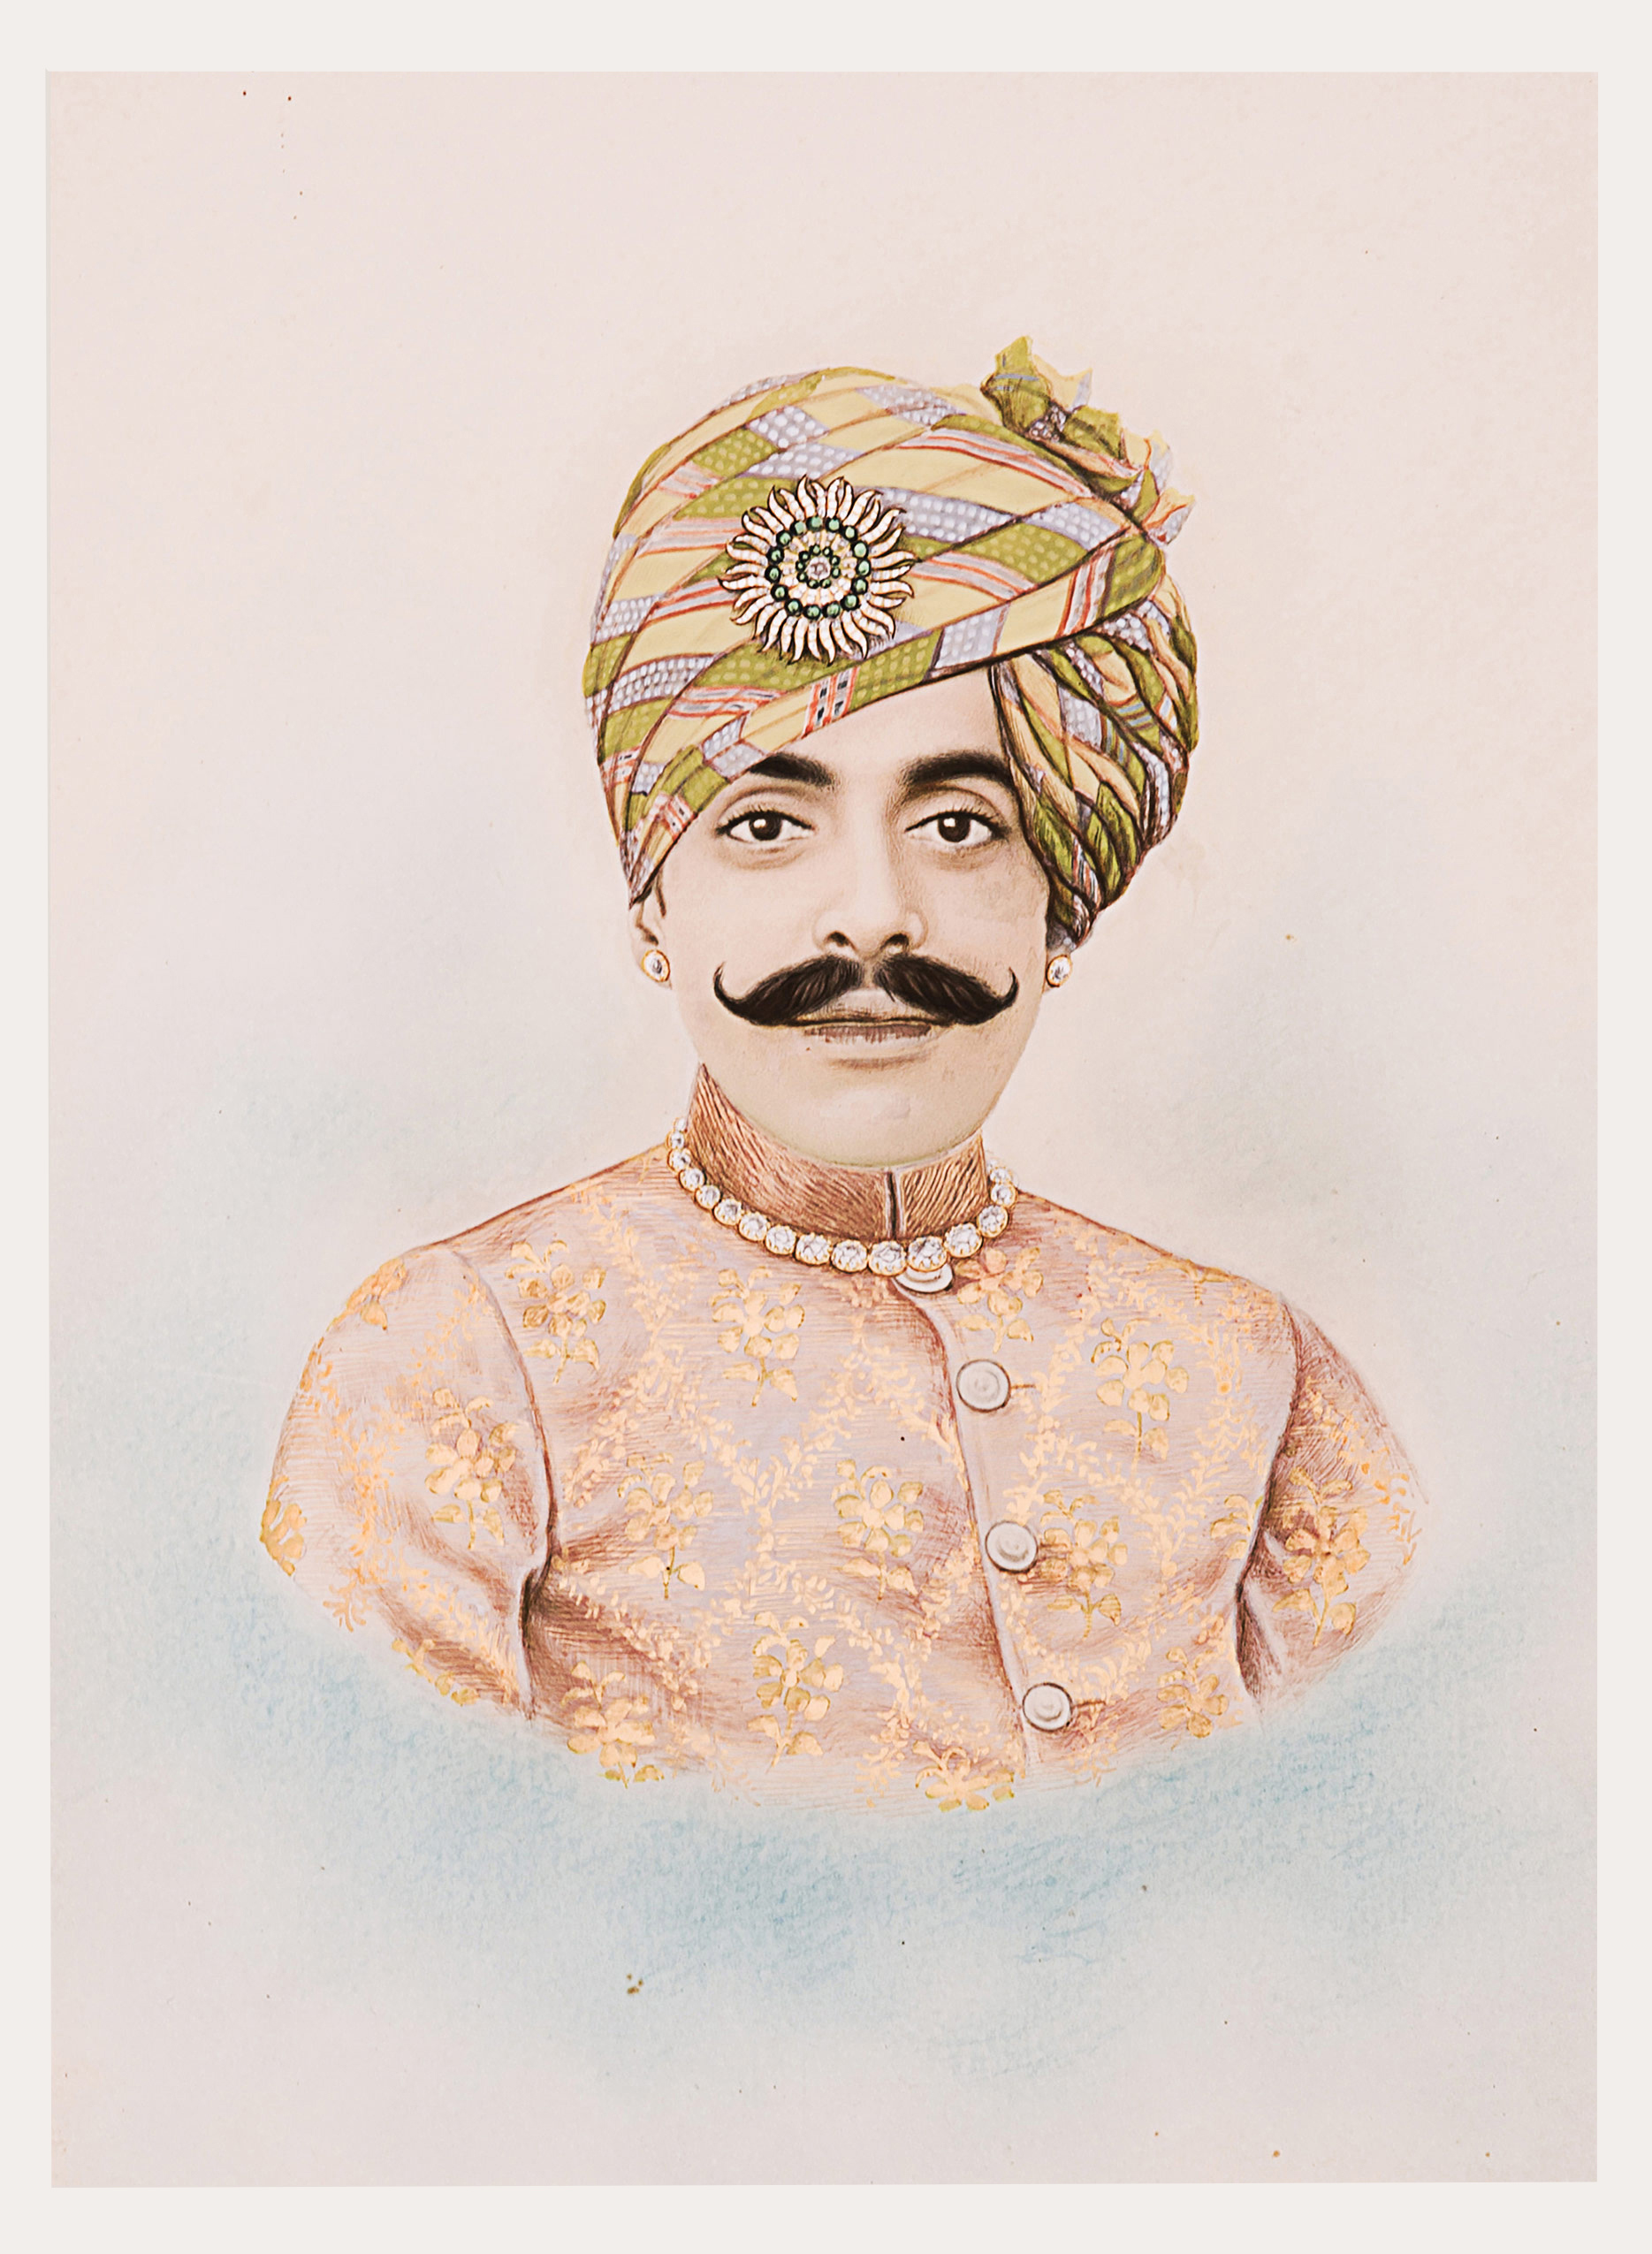 A man directly looks at us. He has a thick long moustache which is curved at the edges. He wears a high collared costume with a chain around his neck. Painted light tones of pale blue, pink and grey surround his portrait.